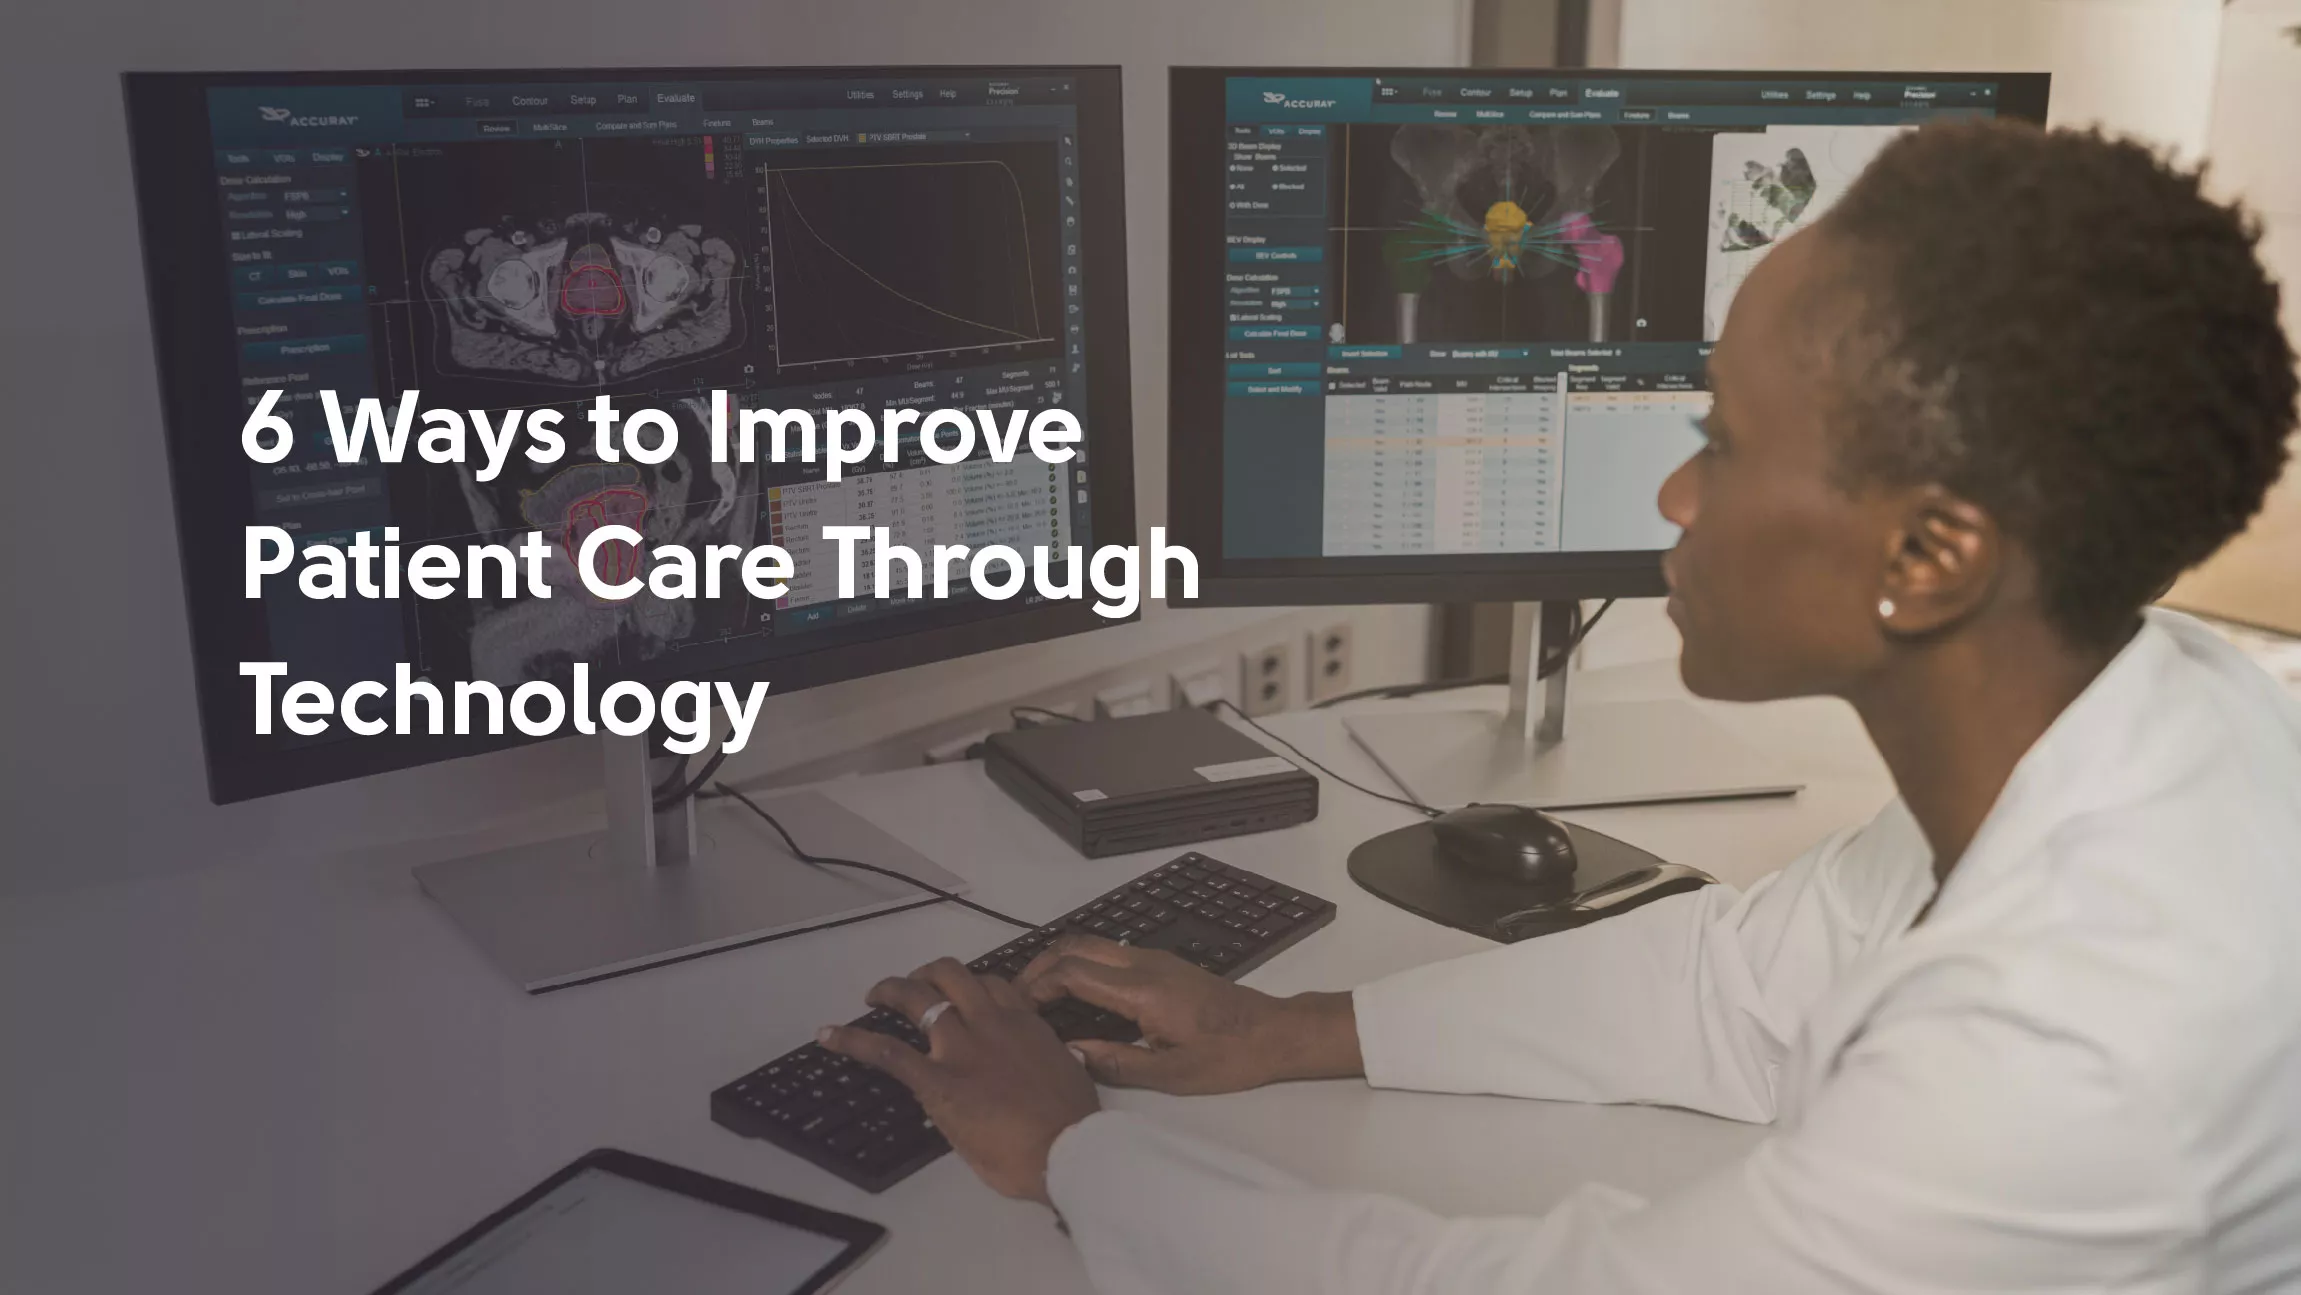 6 Ways to Improve Patient Care Through Technology